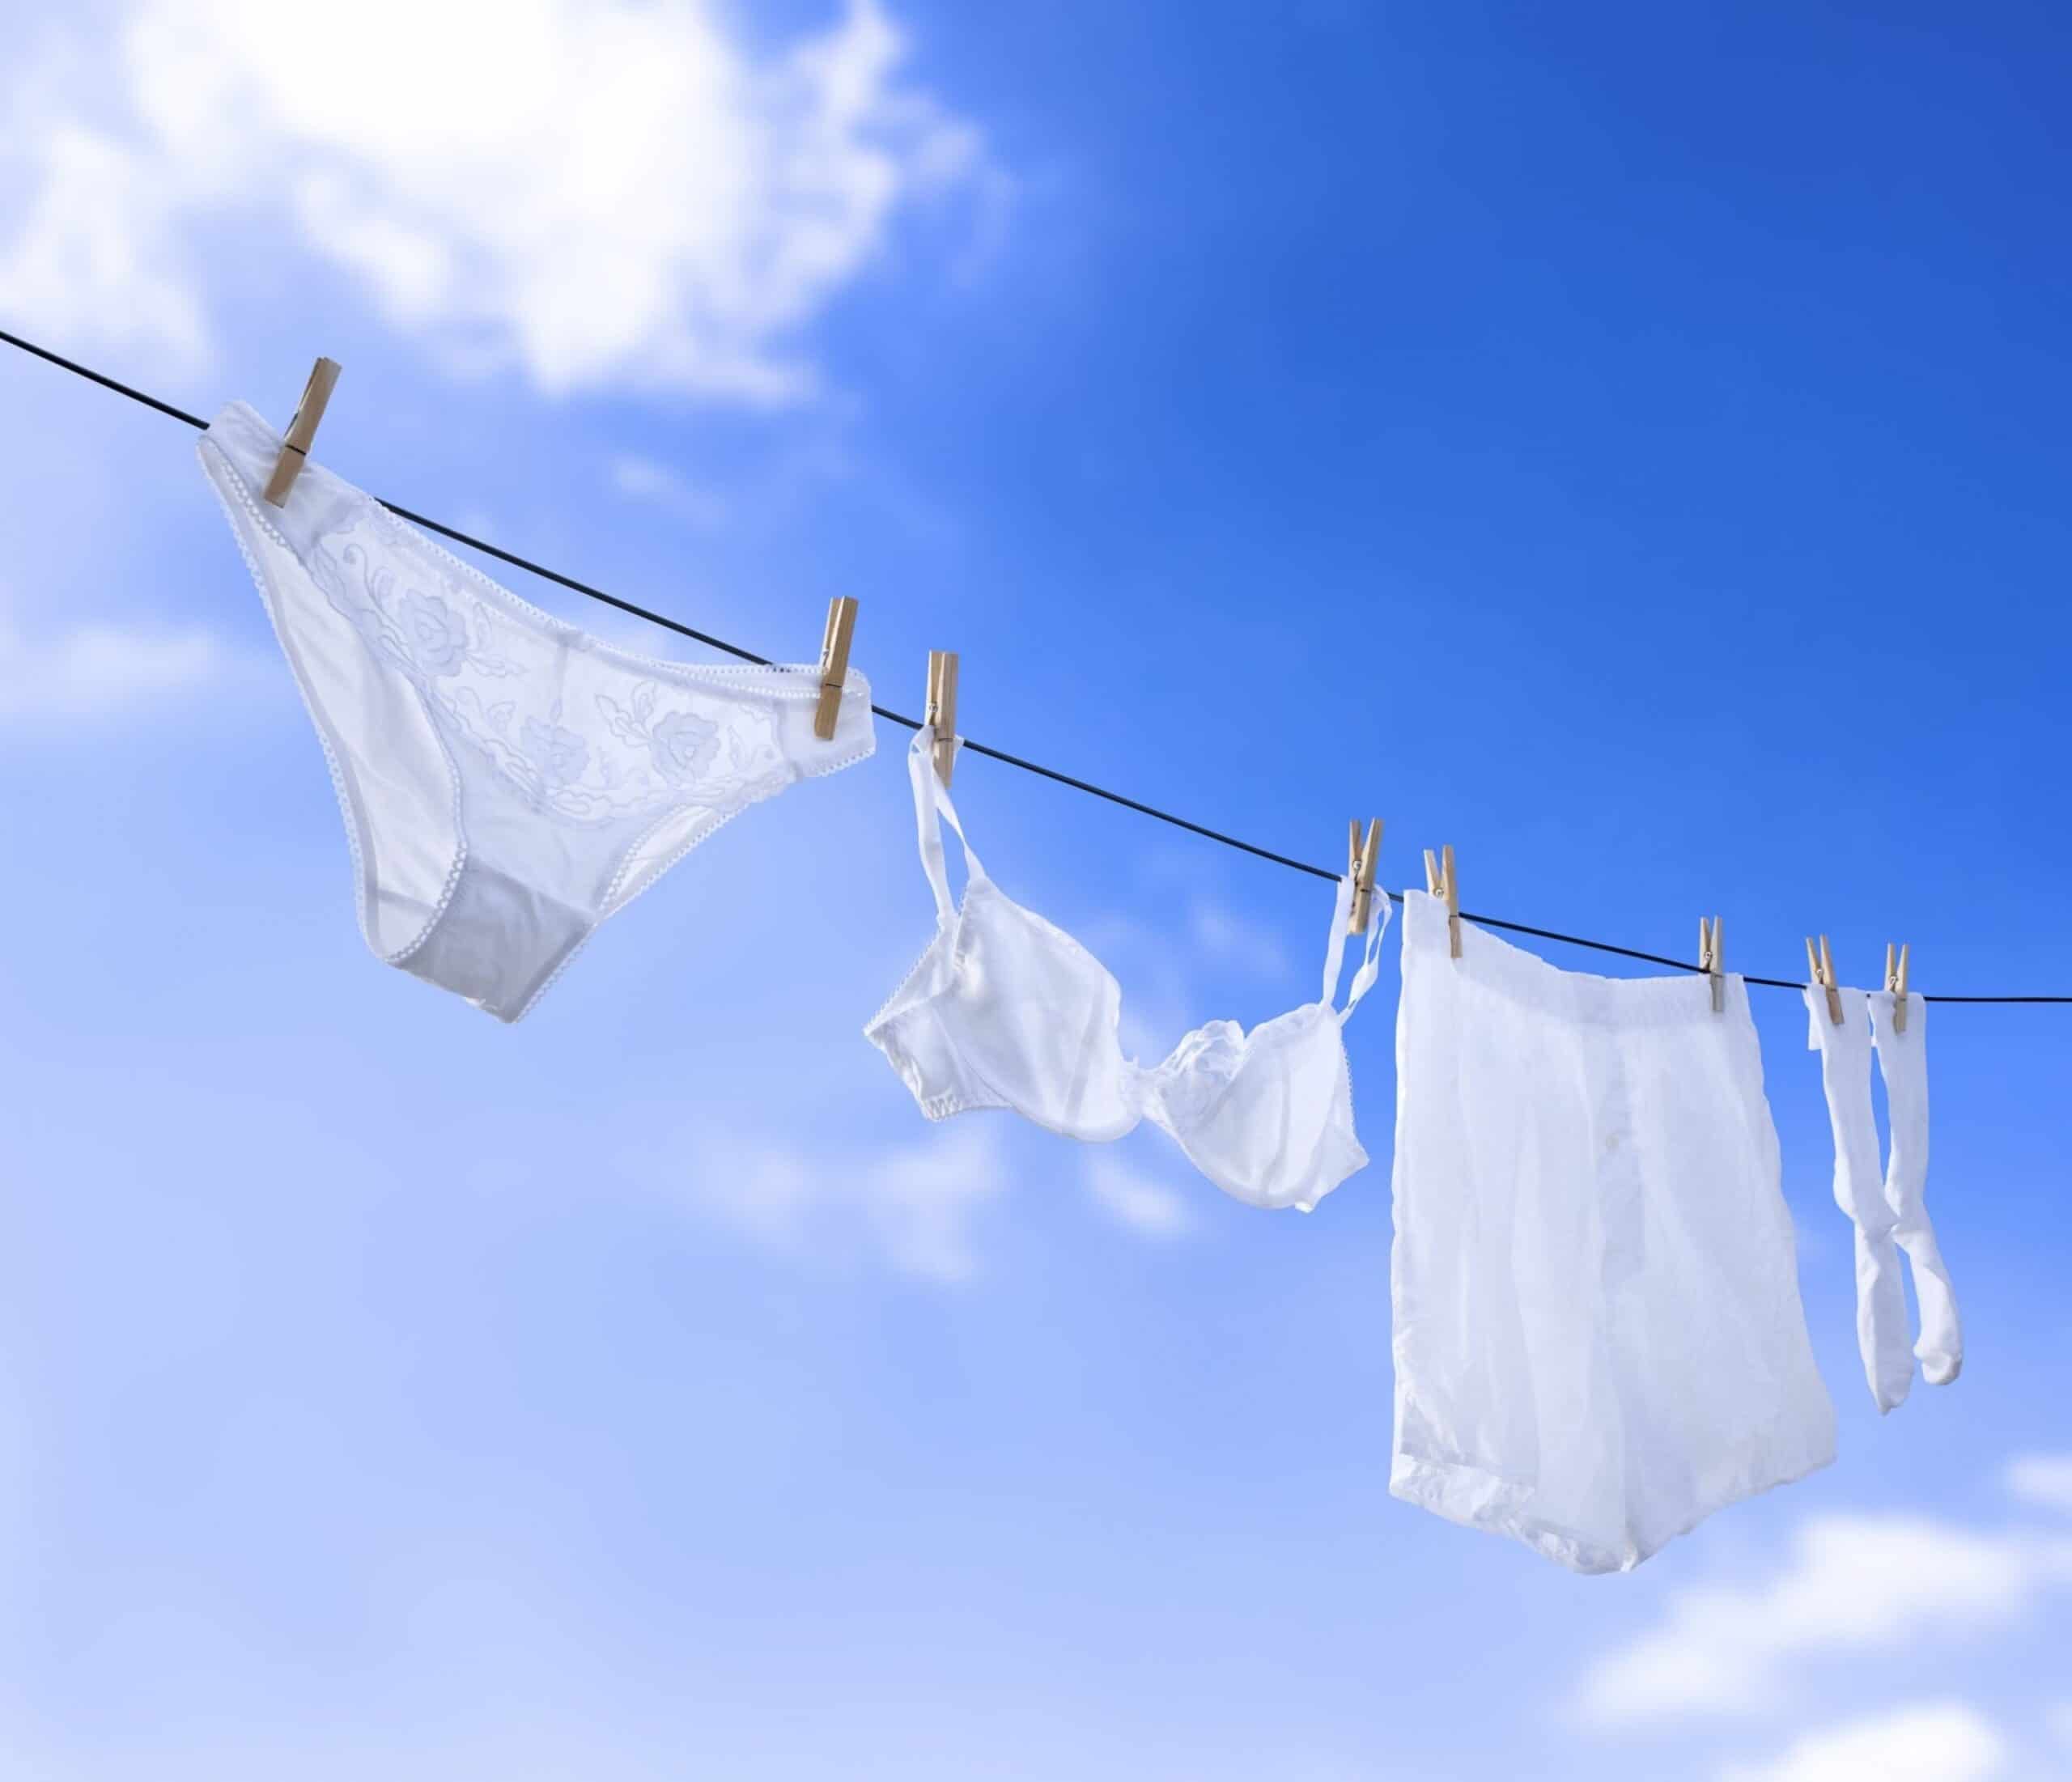 How To Wash White Clothes Tidyhere Image of White Underwear Hanging in Clear Blue Sky